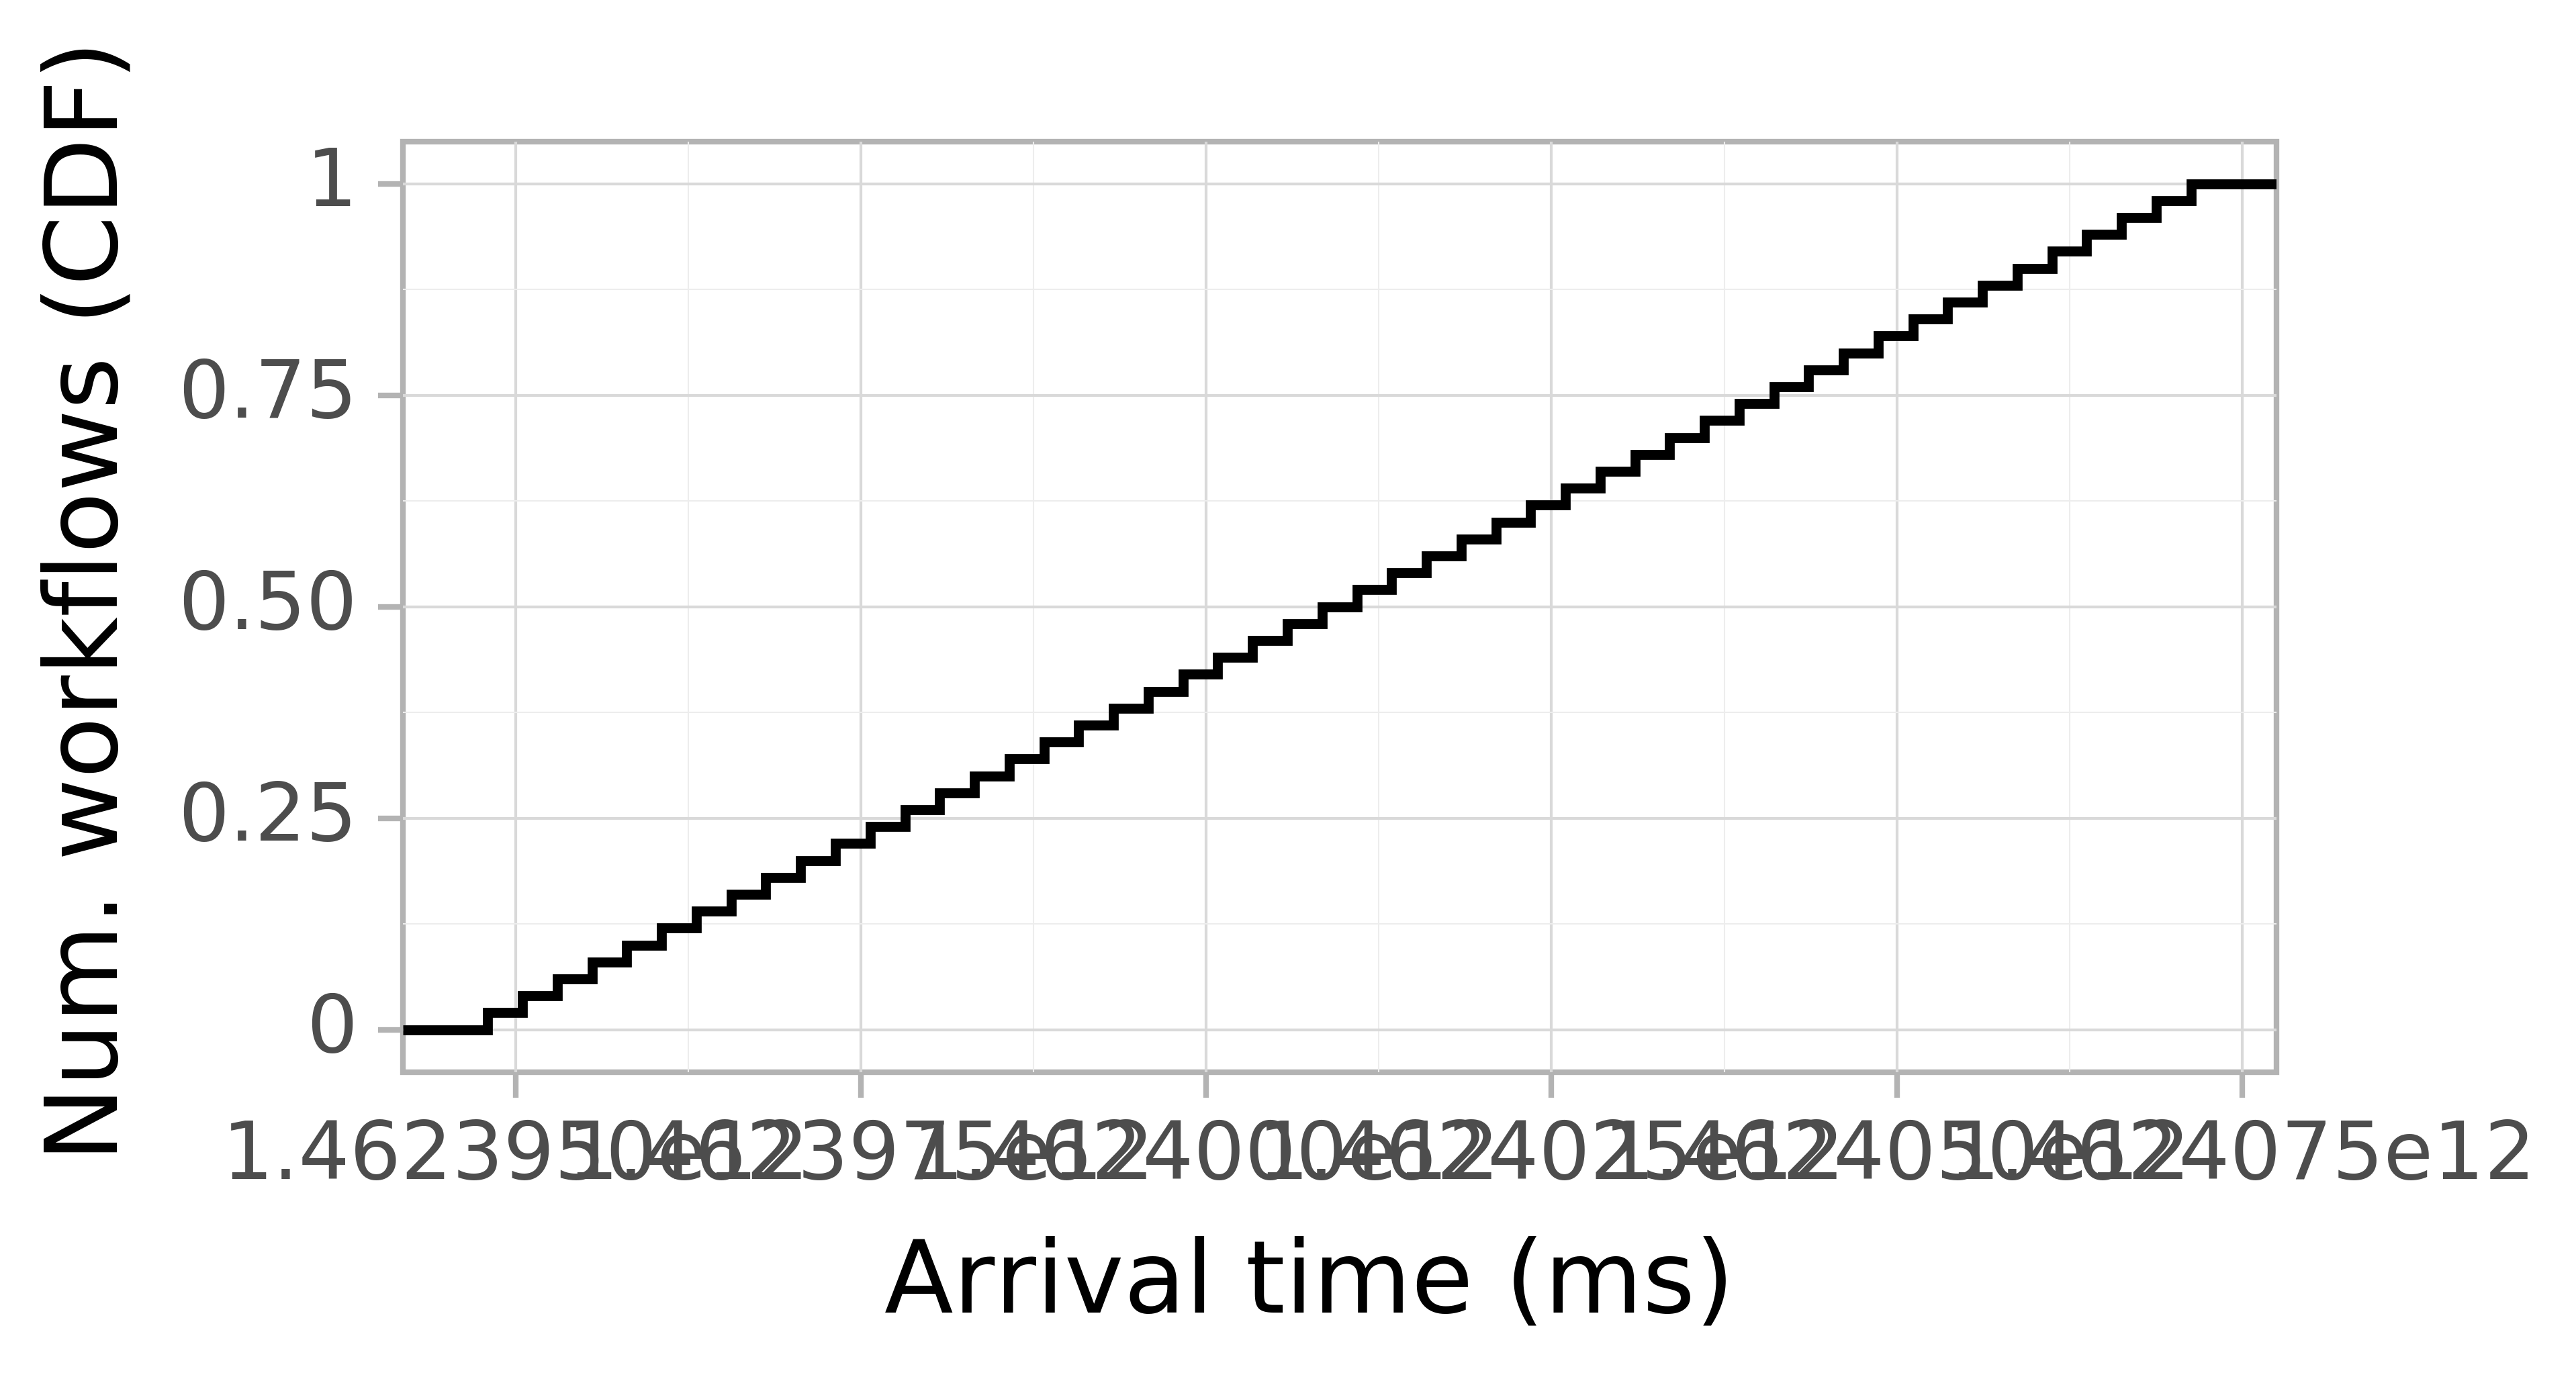 Job arrival CDF graph for the askalon-new_ee38 trace.